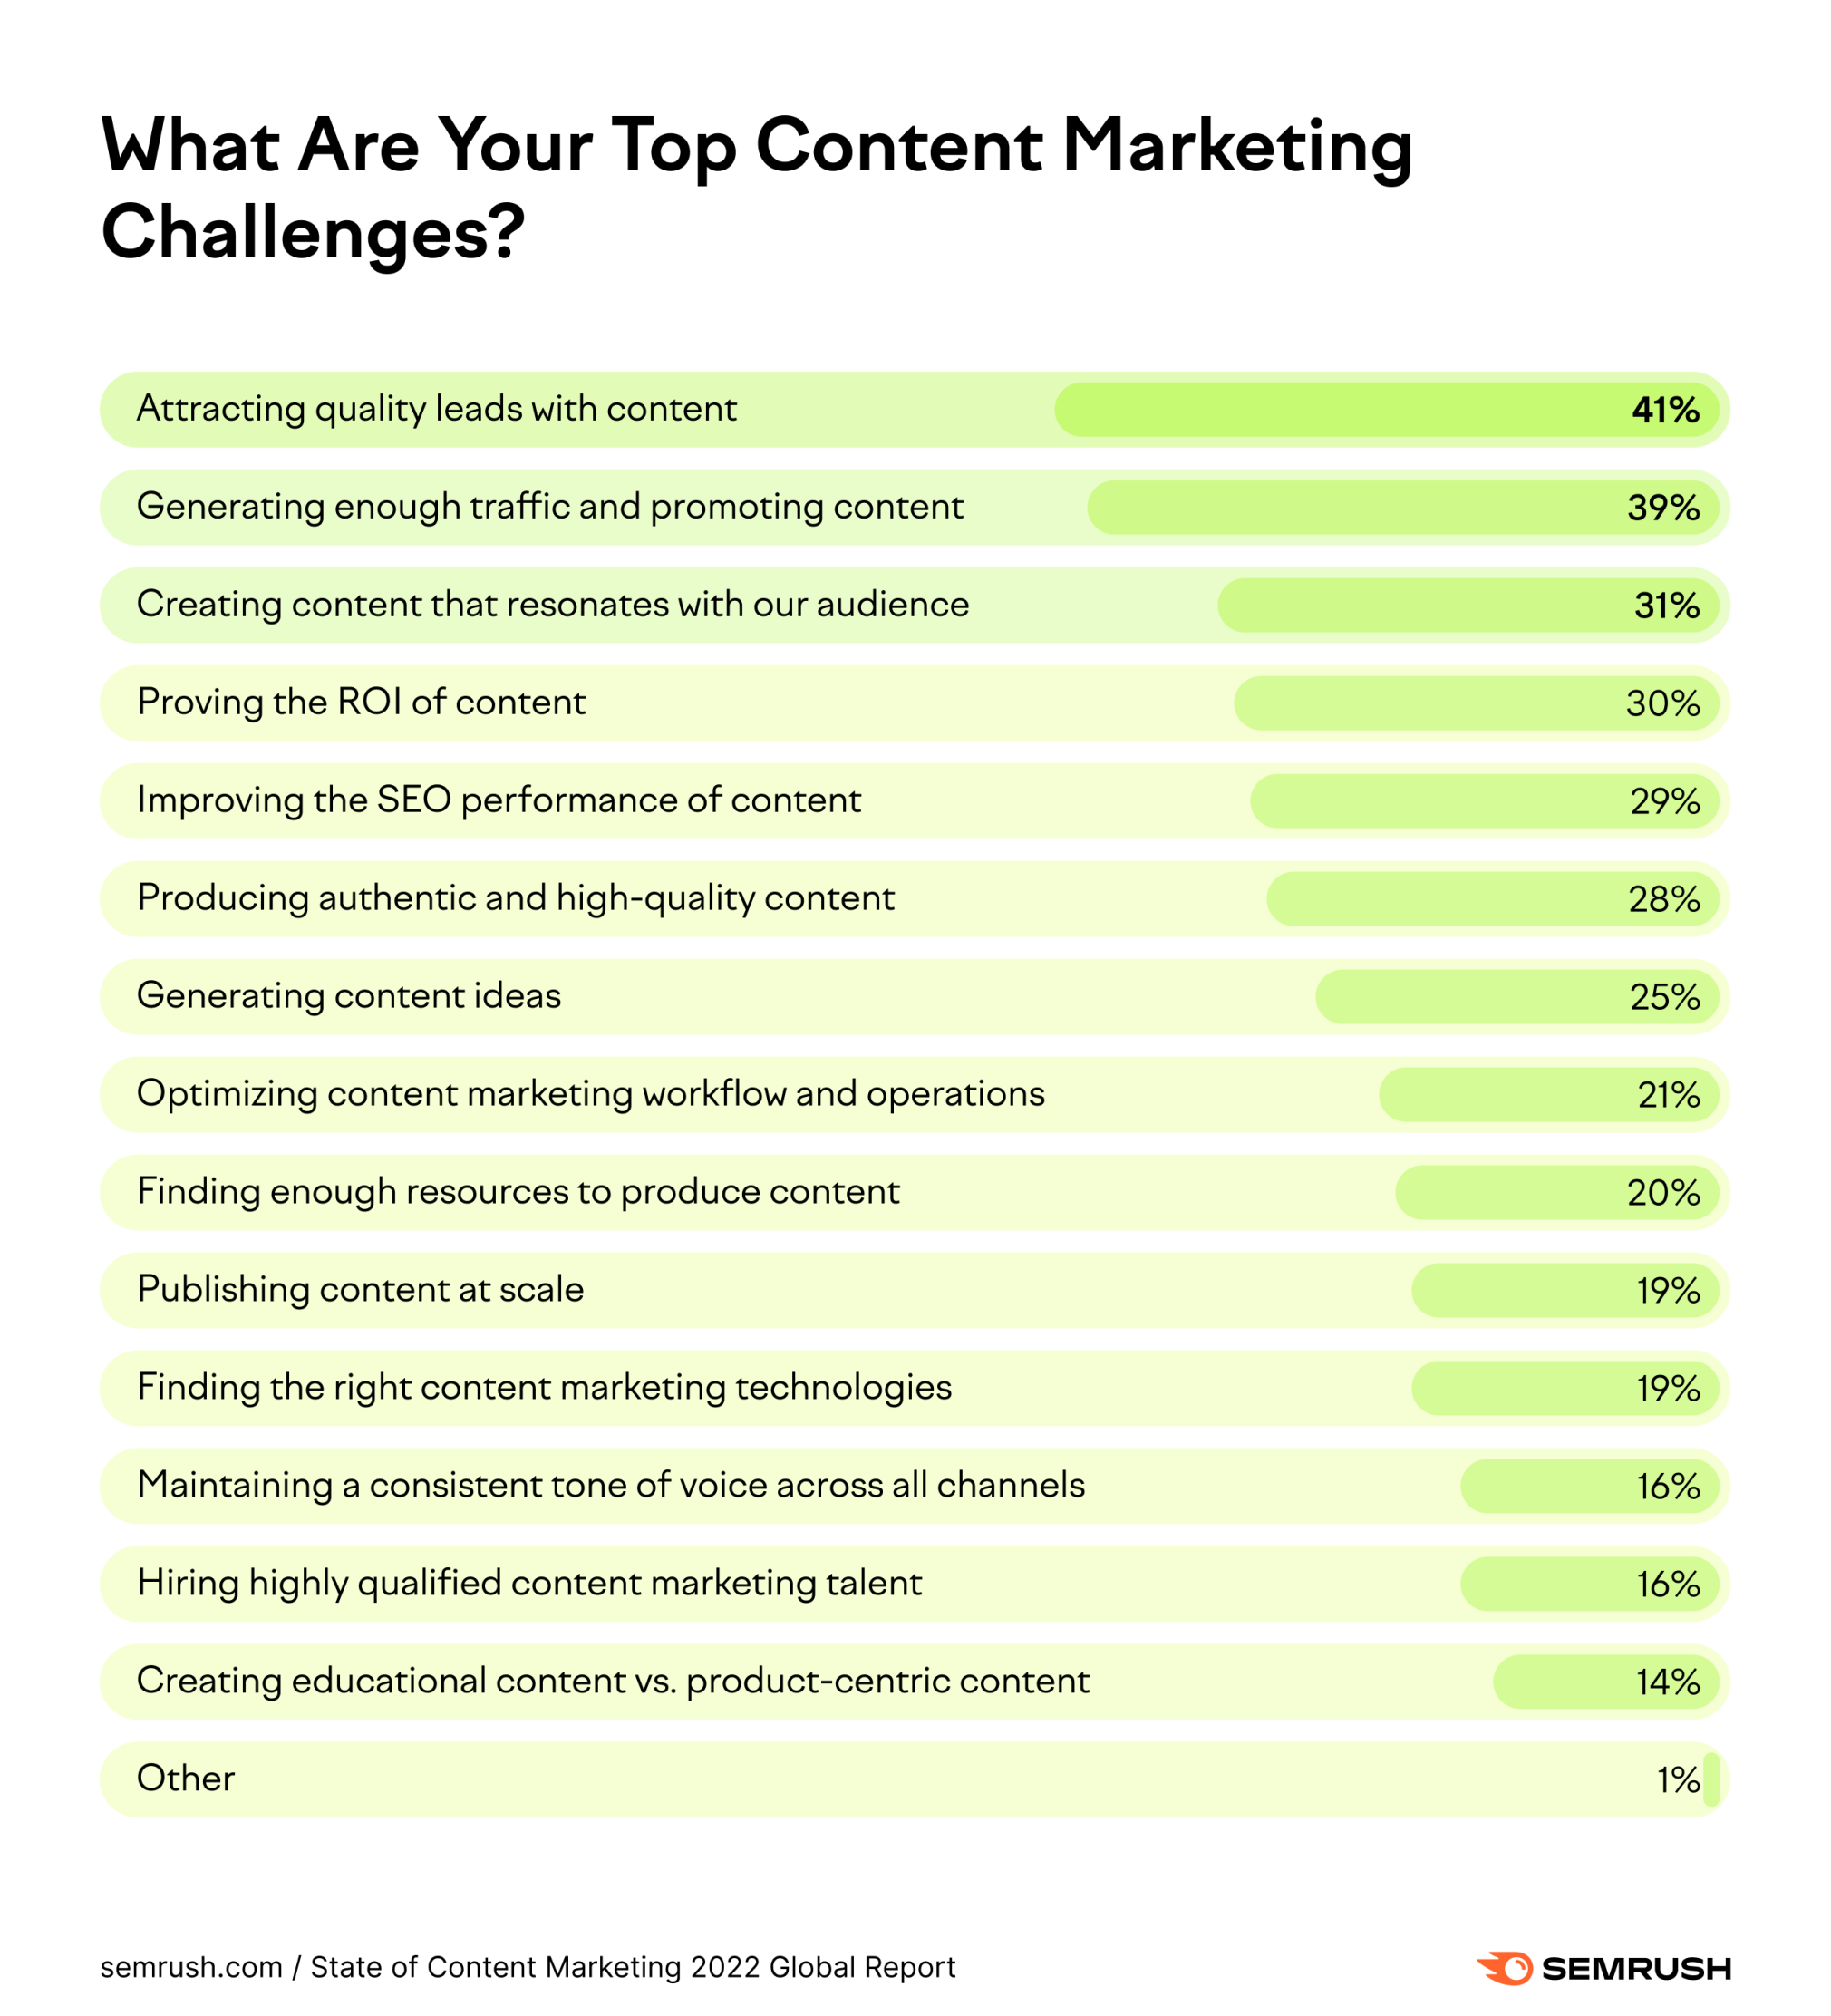 content marketing challenges in 2022